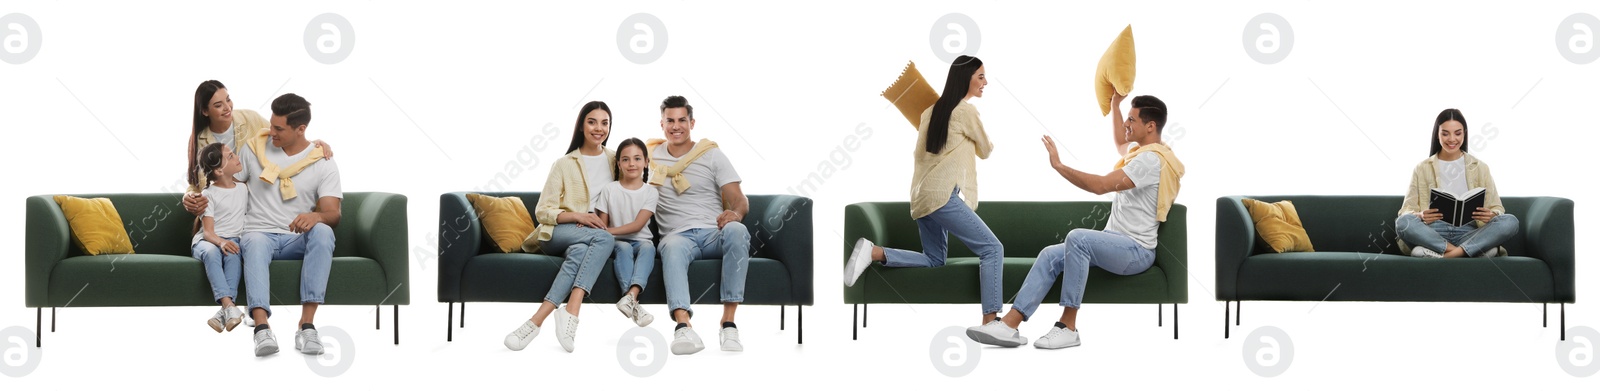 Image of People resting on different stylish sofas against white background, collage. Banner design